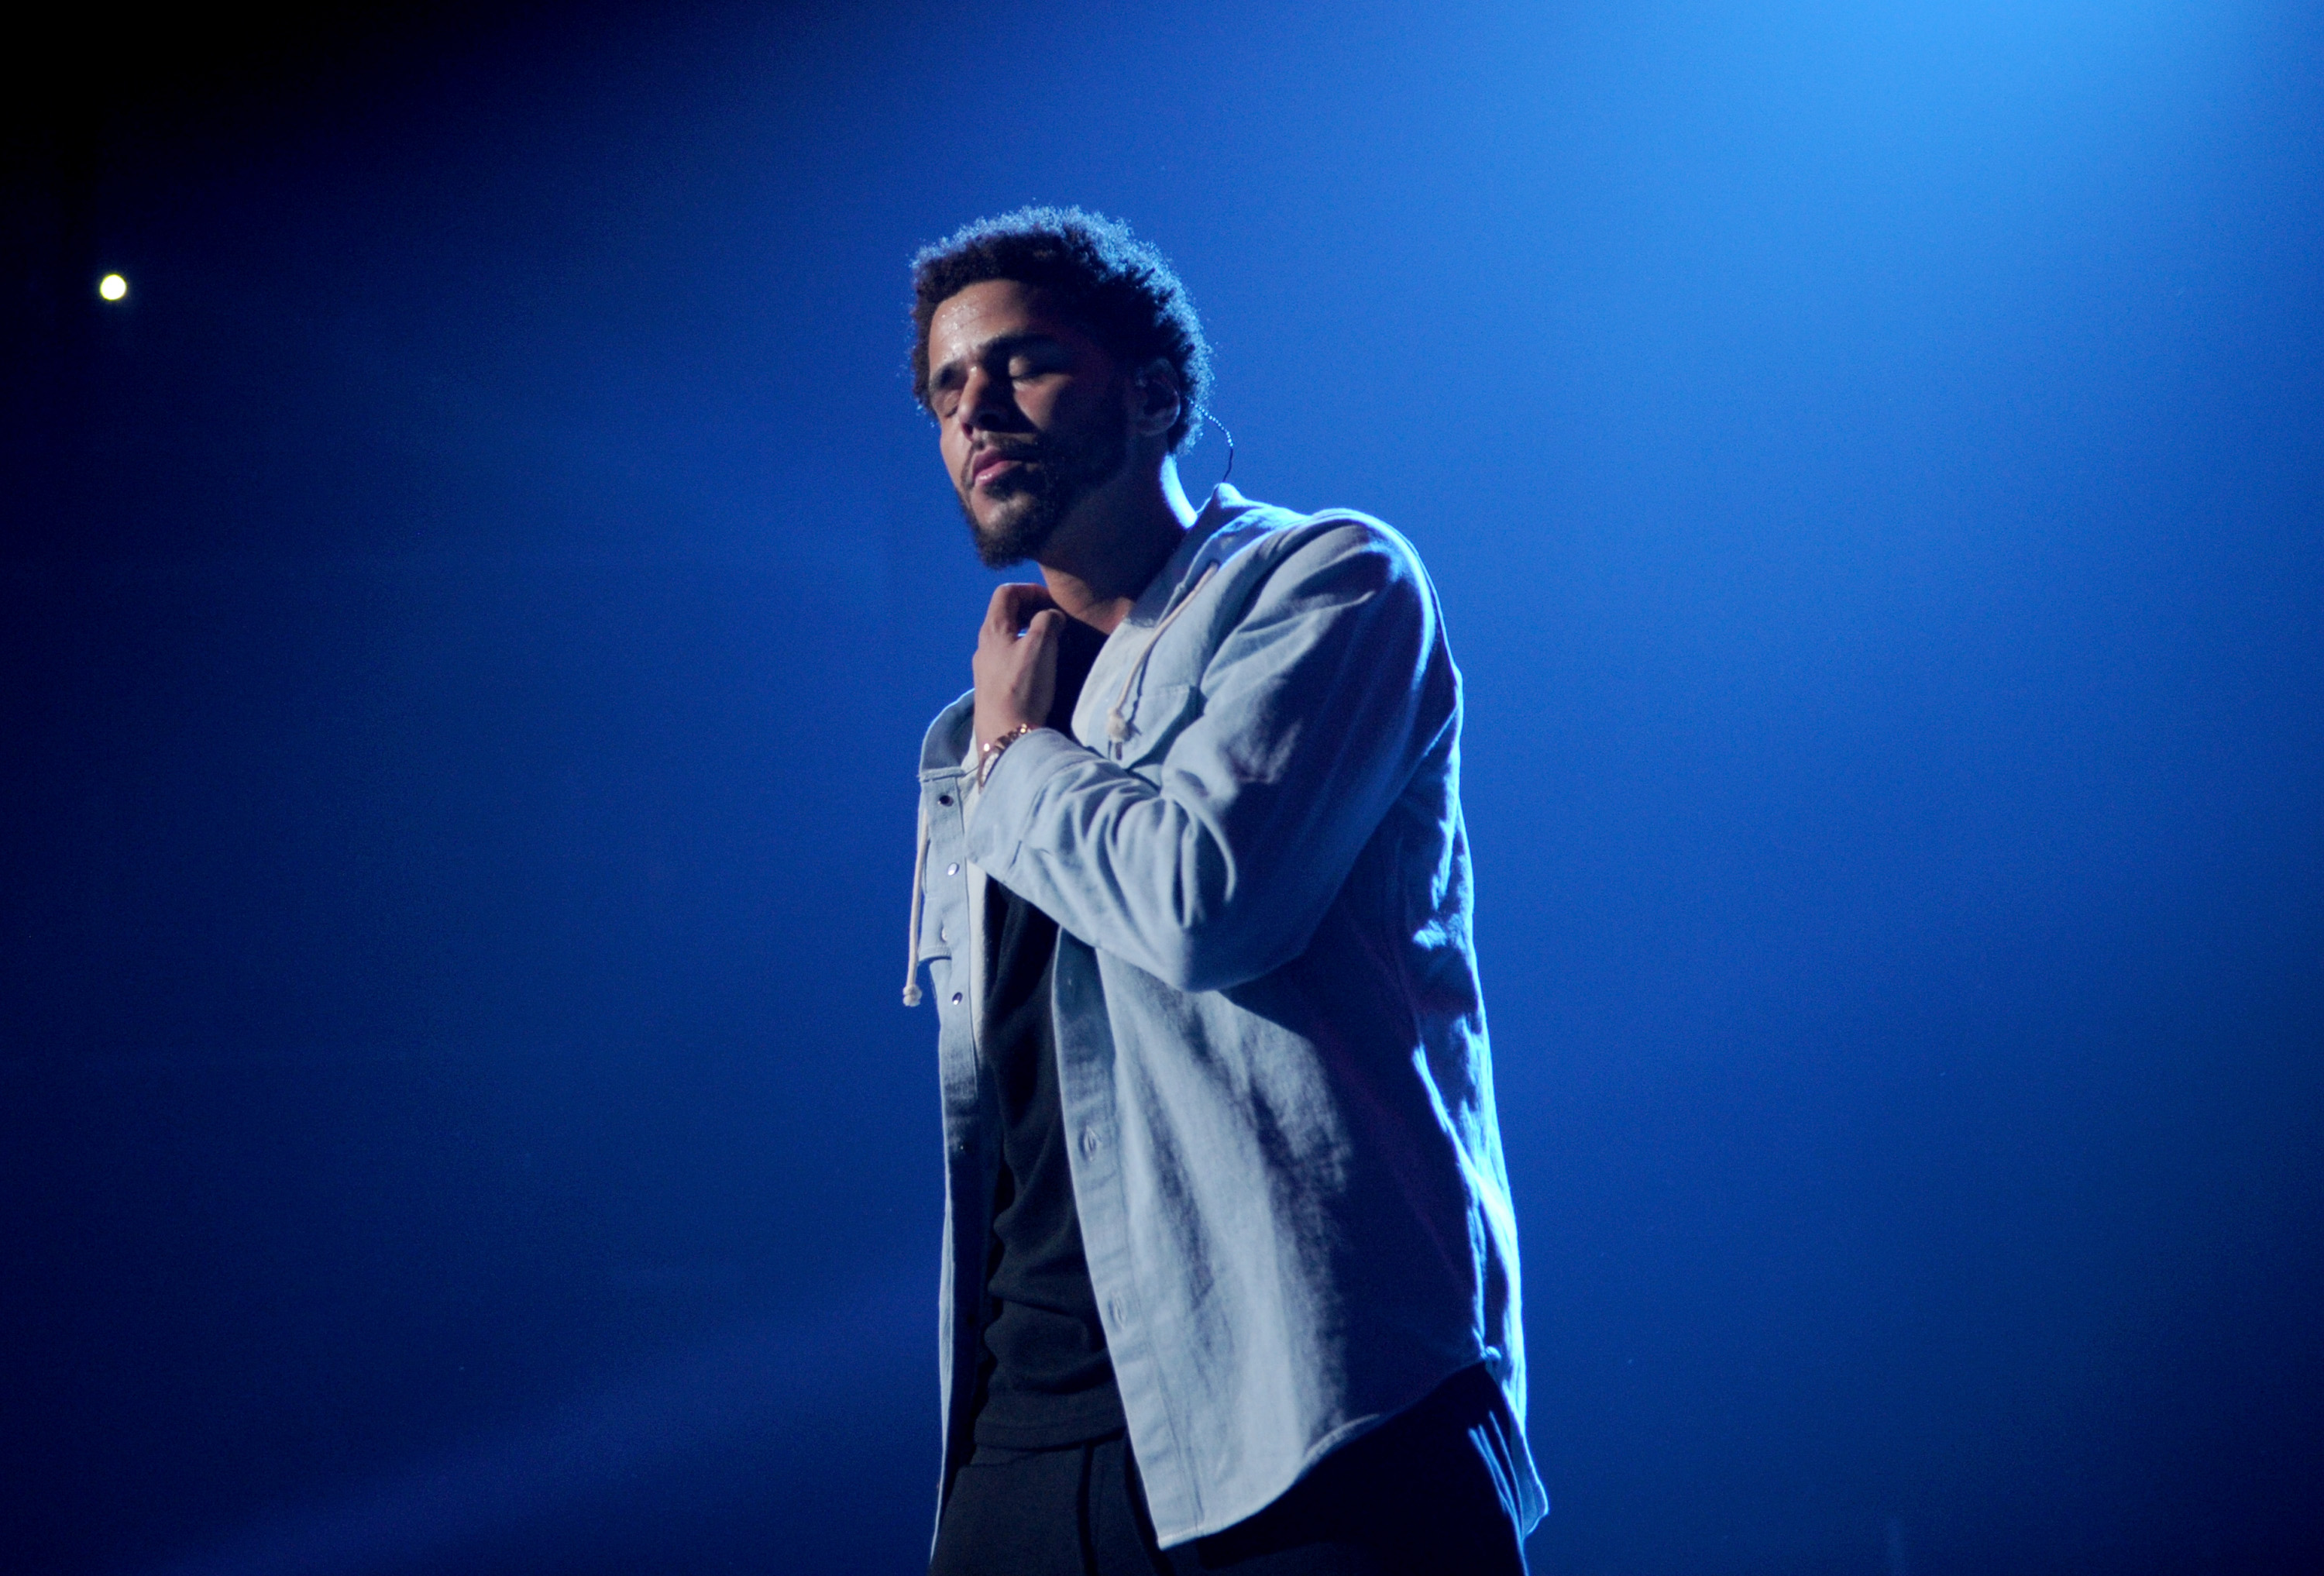 J. Cole’s “K.O.D” First Impressions Are Looking Good